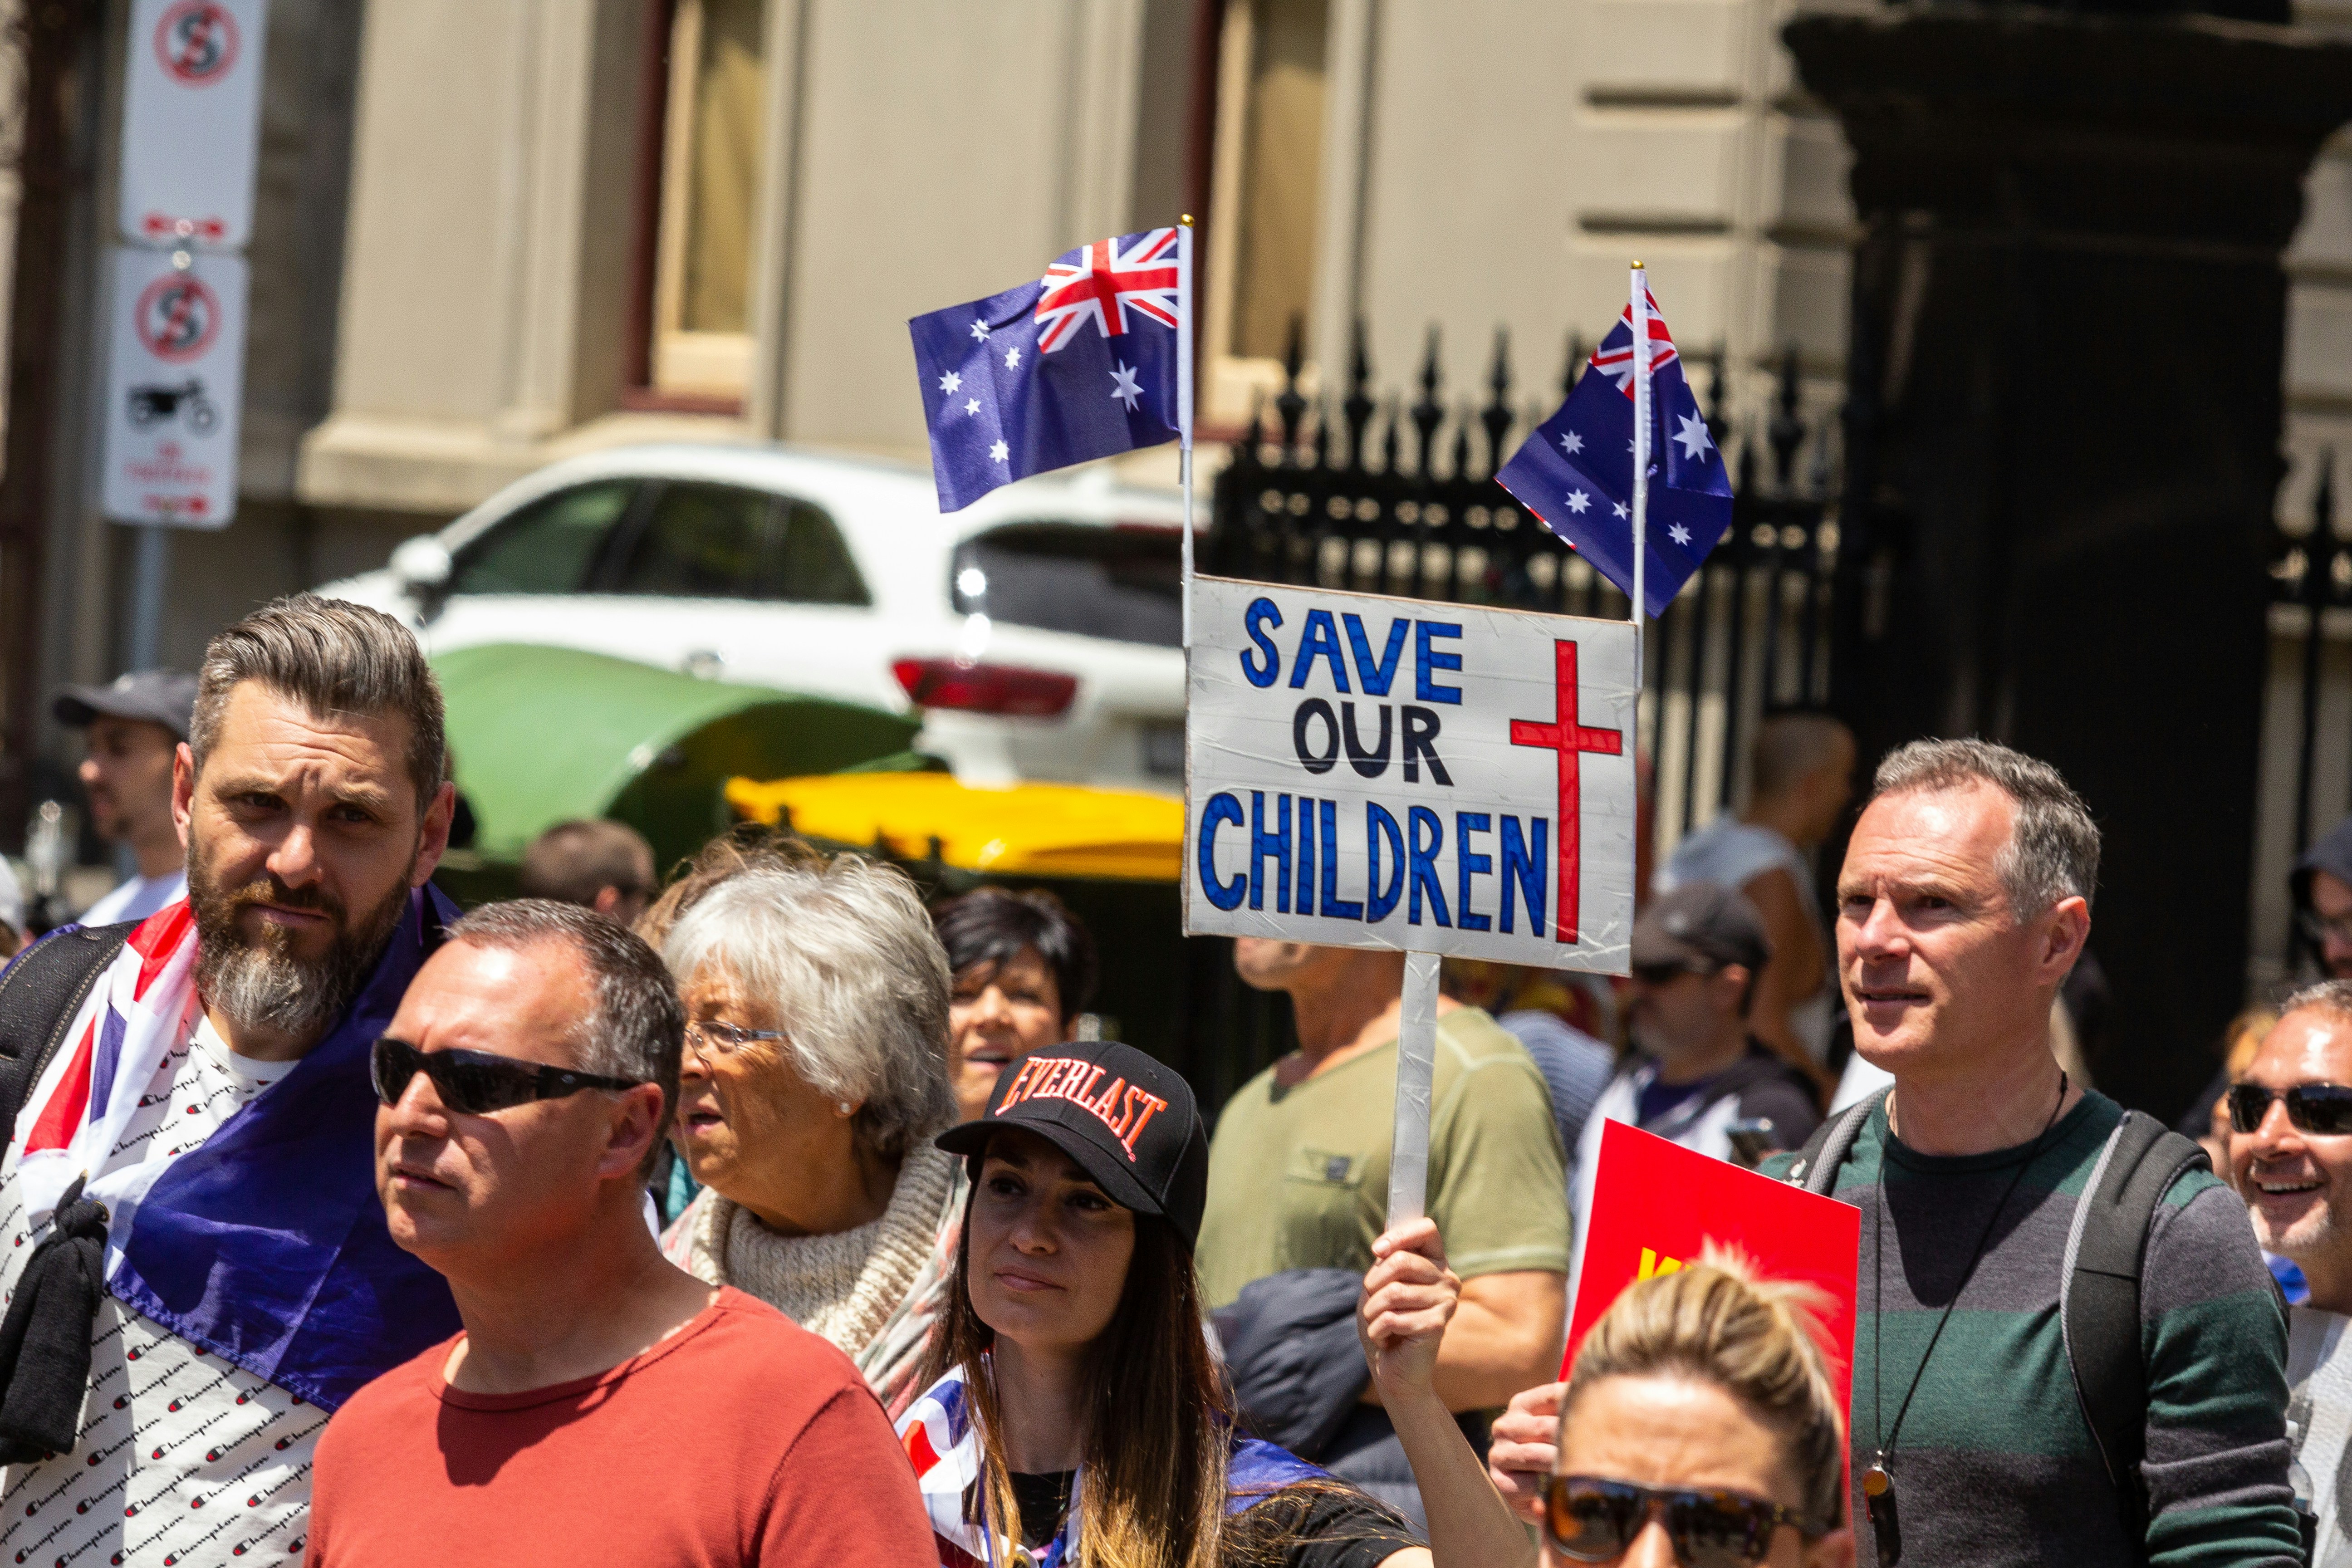 Save Our Children - Melbourne's Freedom protests rally and march in the city November 20th 2021 - over 200,000 people marched from Parliament to the Flagstaff Gardens. A happy family friendly crowd singing and chanting \